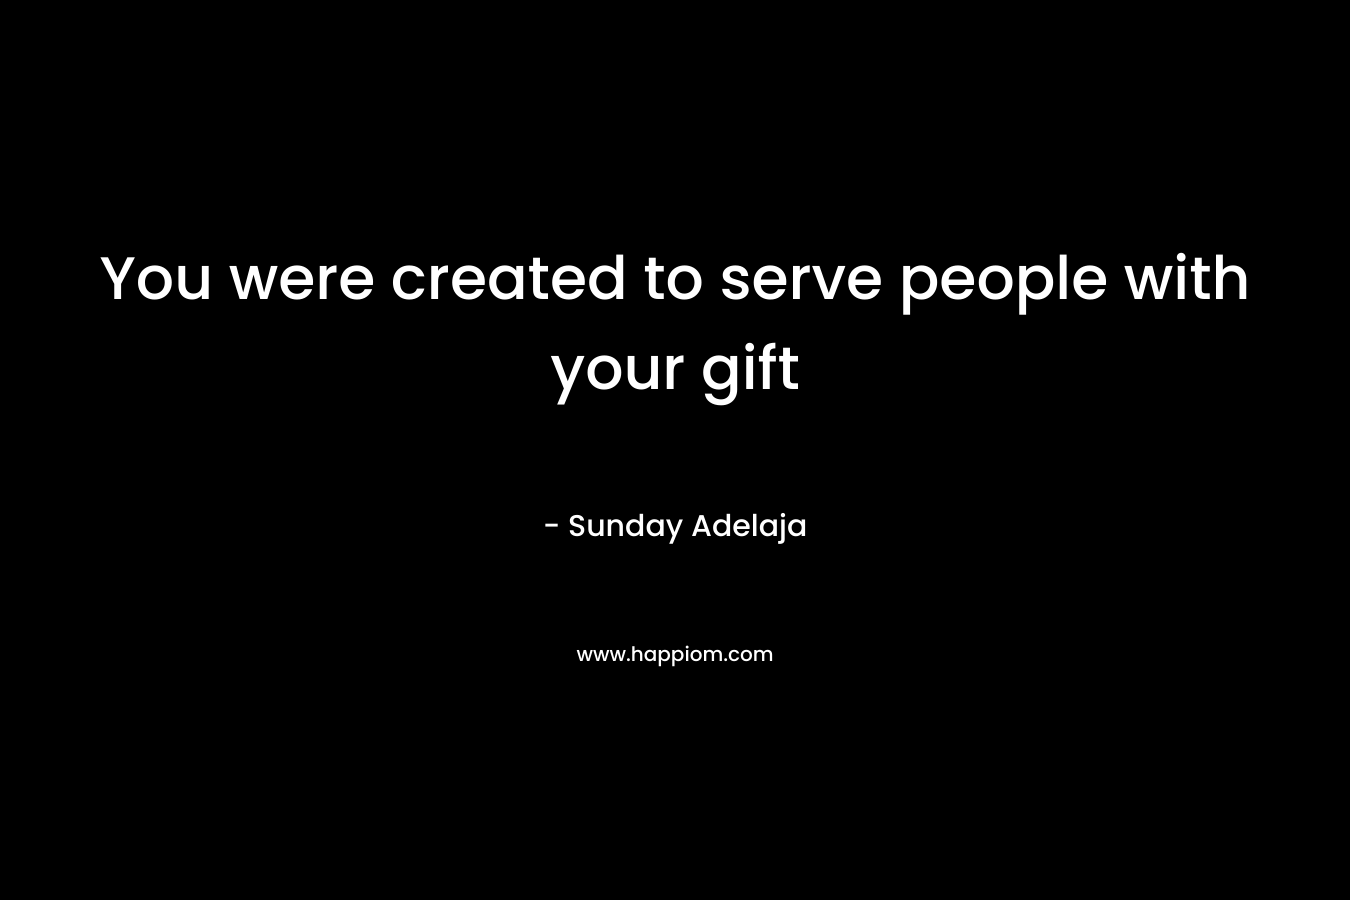 You were created to serve people with your gift